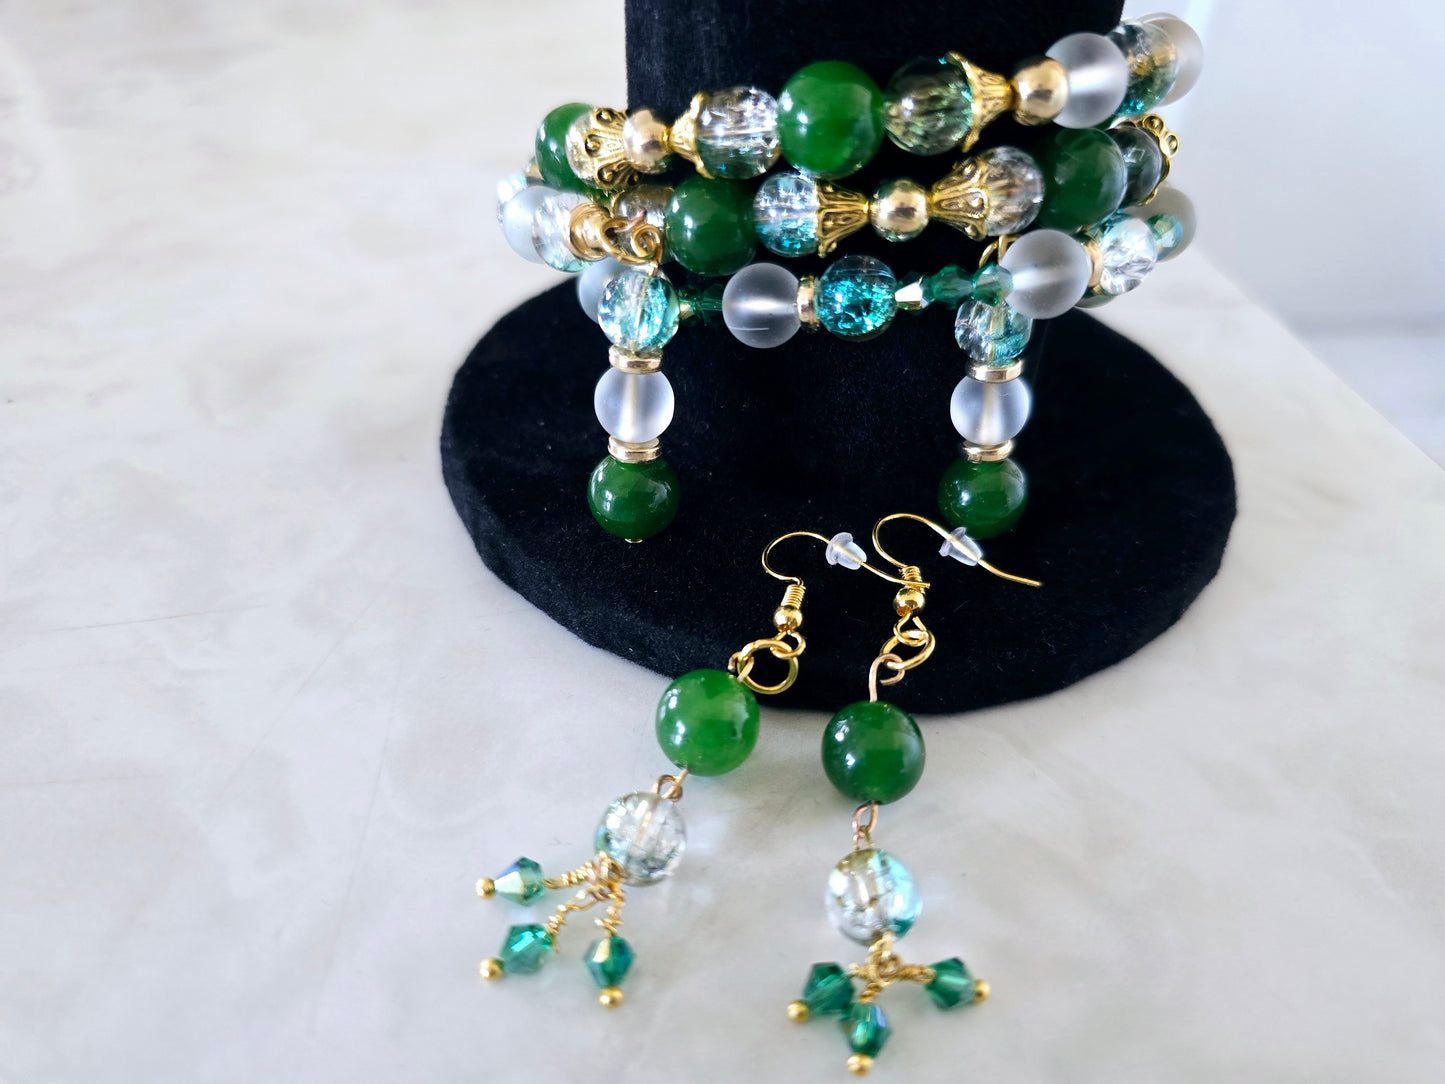 Beaded Memory Wire Bracelet + Earring Set Hunter Green Clear Green and Gold Crackle Beads Gold Spacers One-Of-A-Kind Jewelry For Her